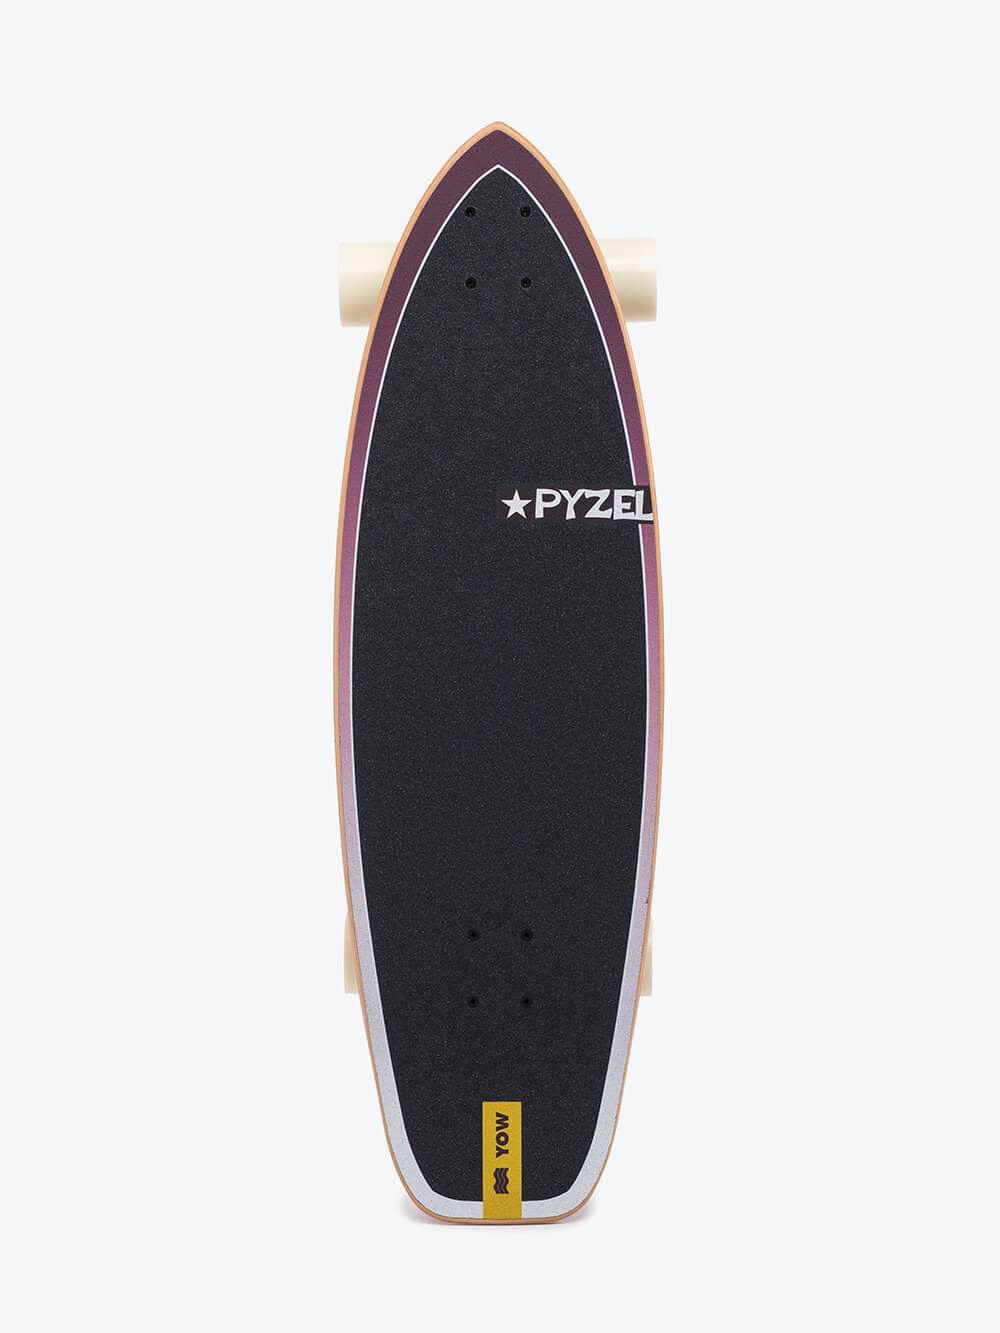 YOW Surfskate Ghost 33.5" Pyzel Surfskate 2022 Complete